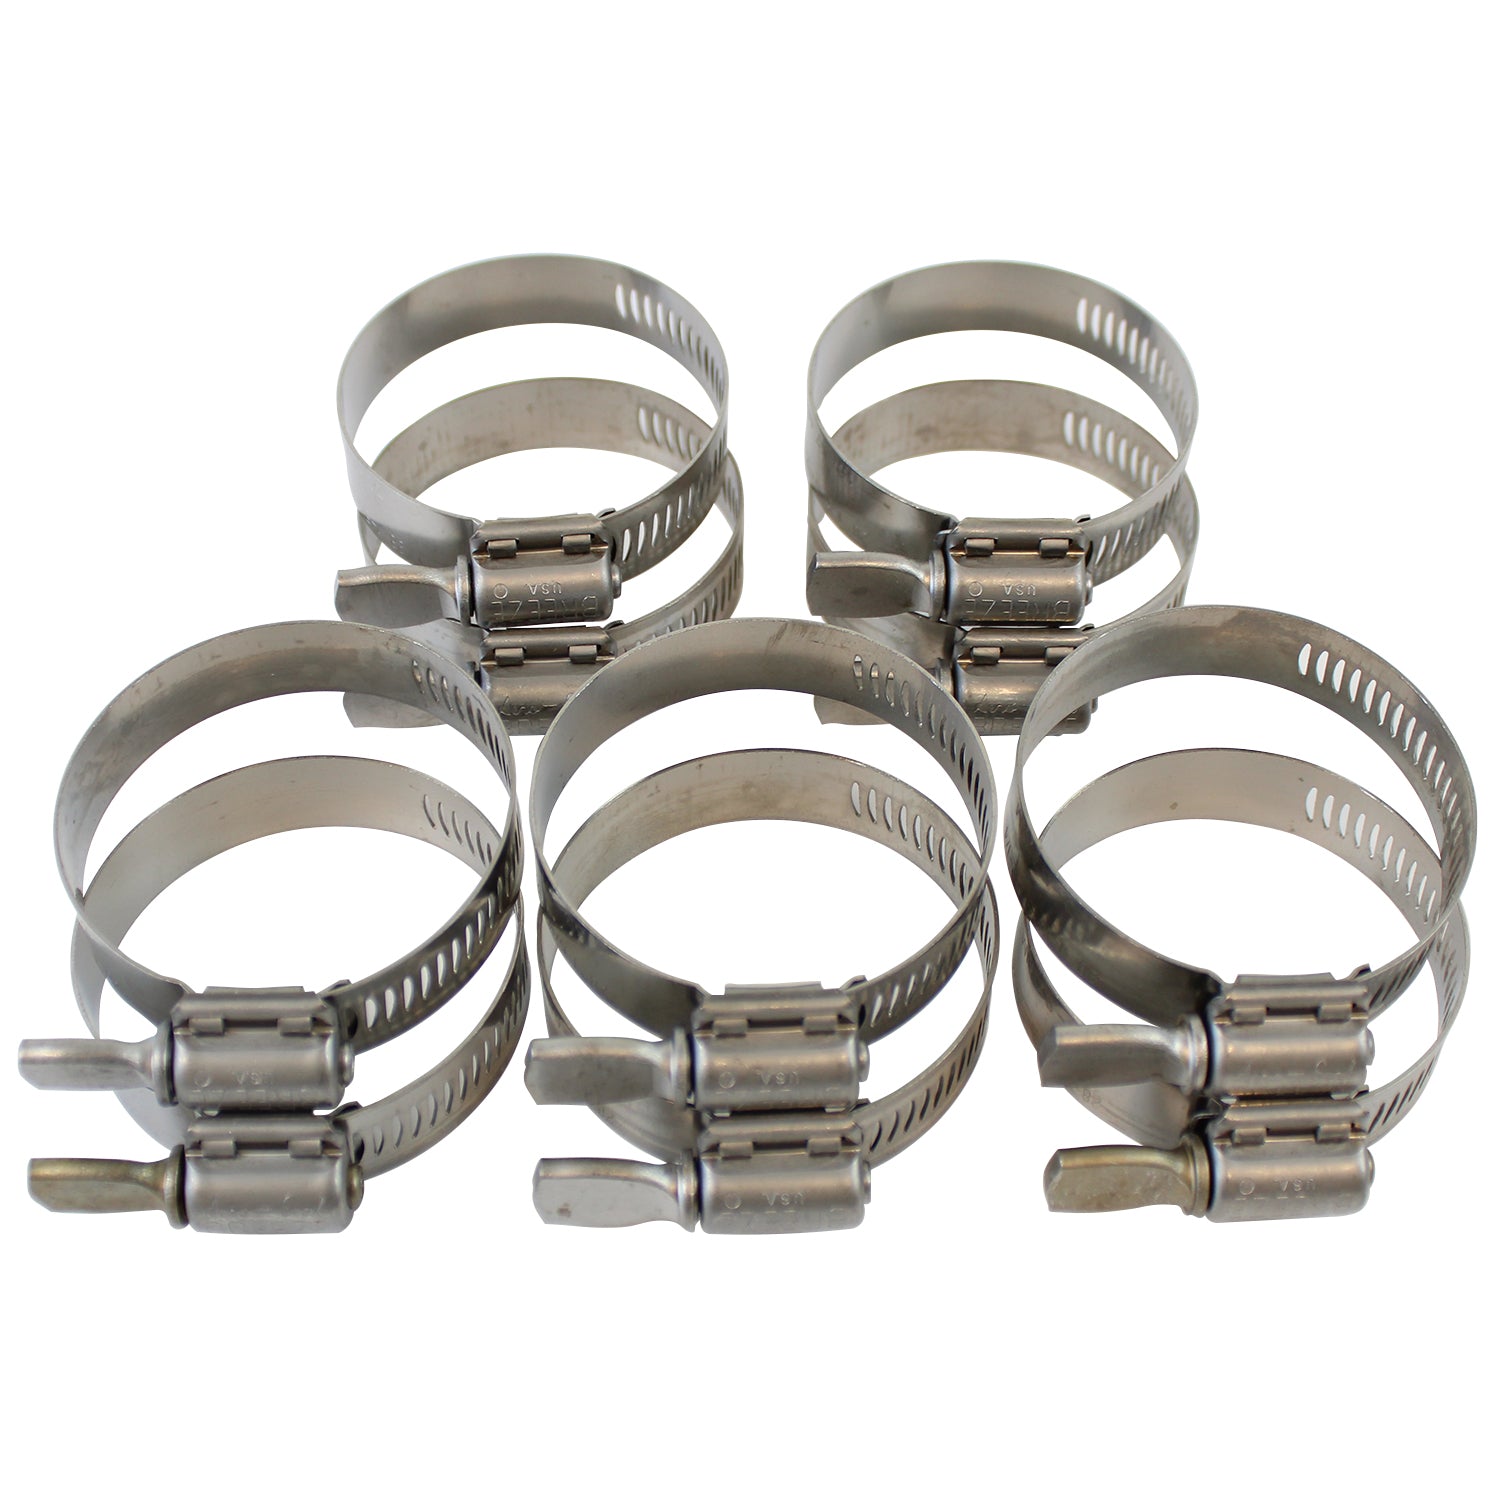 Welch 305360 CLAMP FOR 13/16" ID HOSE 10/PK